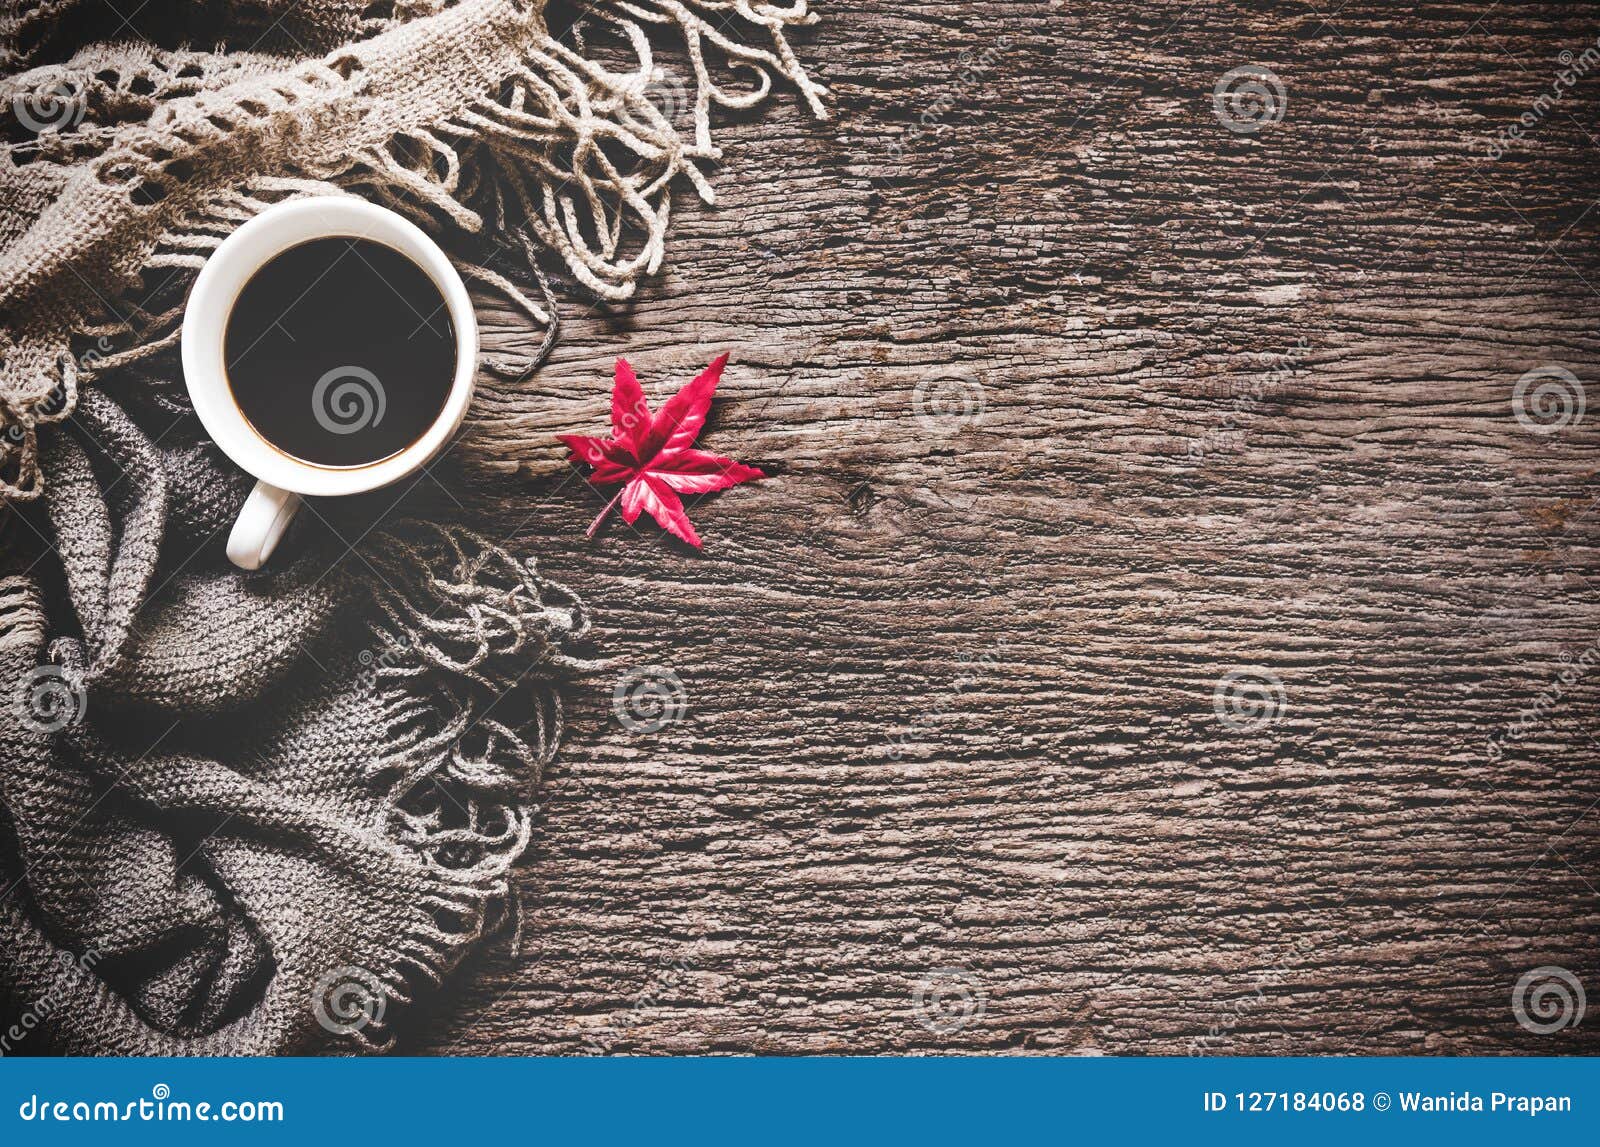 cozy winter background, cup of hot coffee